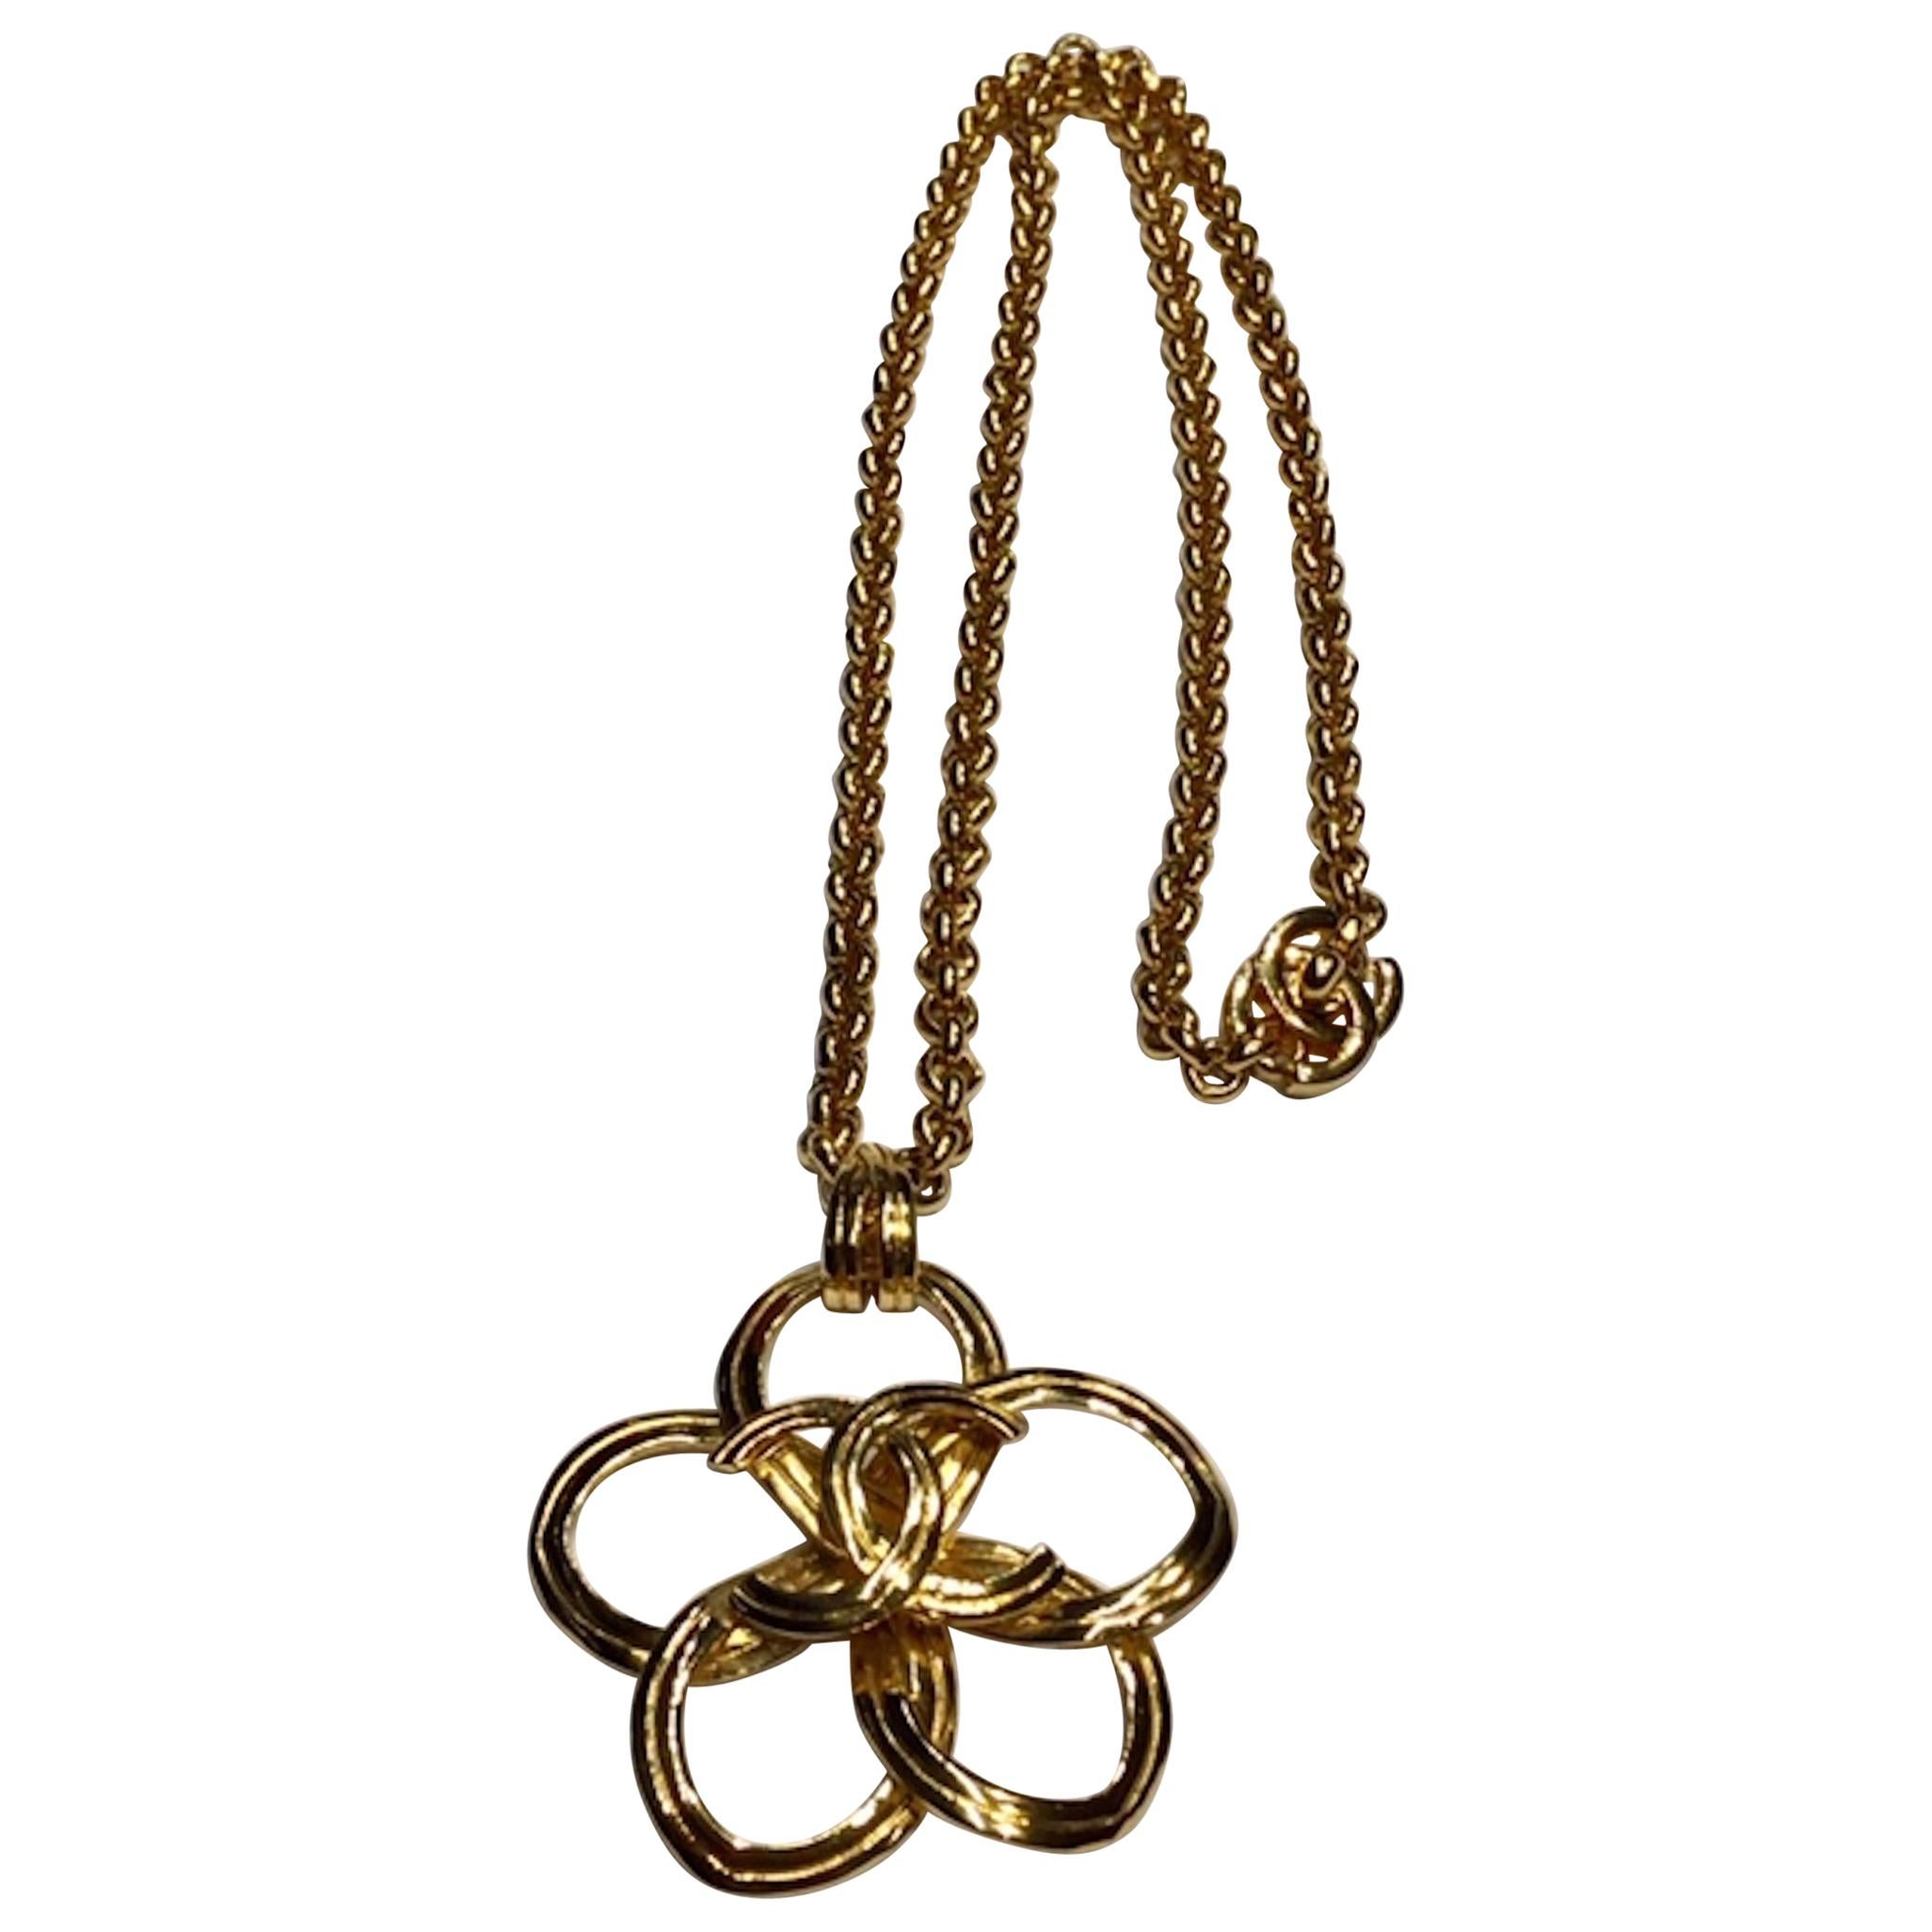 Chanel Flower Pendant Necklace, Spring 1996 Collection